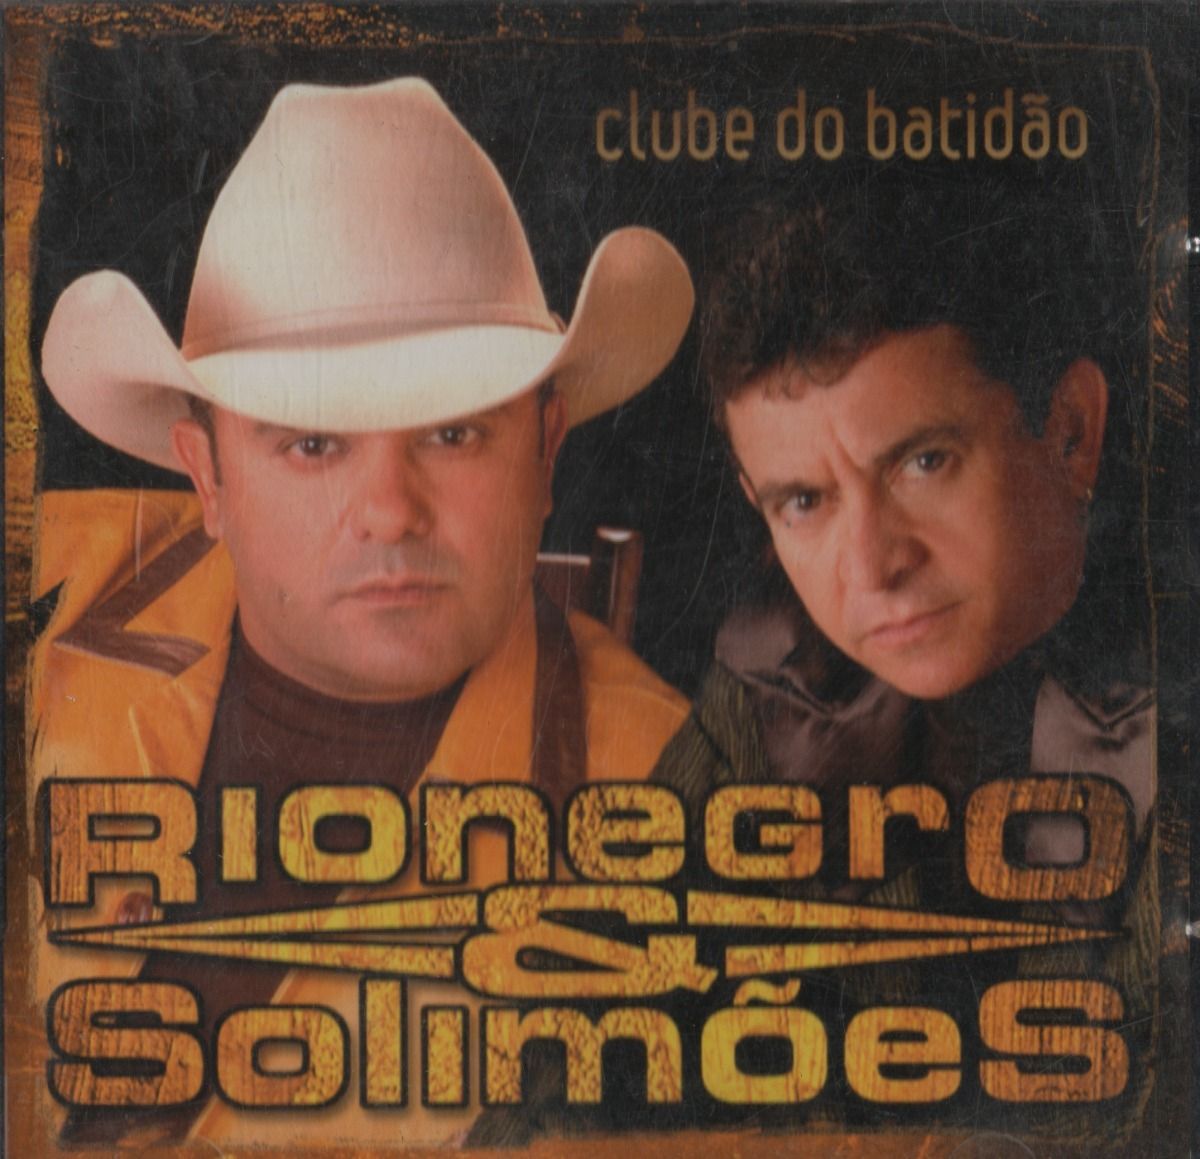 O Grito da Galera by Rionegro & Solimões (Album): Reviews, Ratings,  Credits, Song list - Rate Your Music